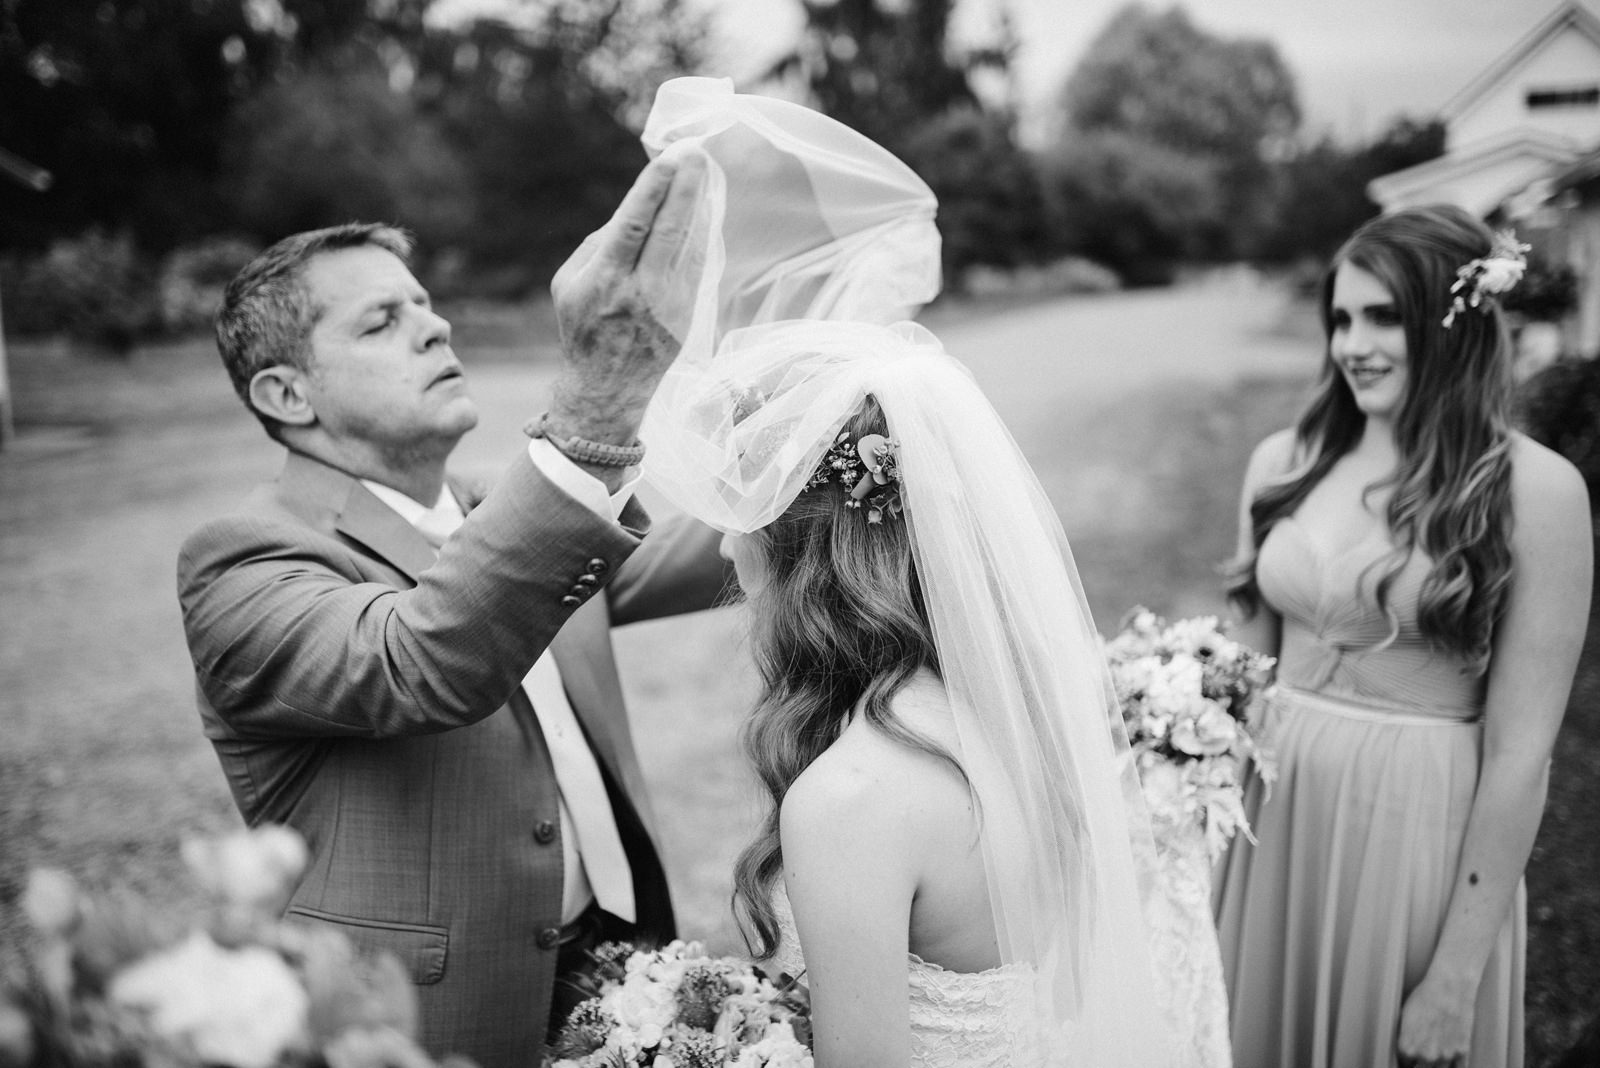 066-poignant-moment-between-father-and-bride-from-best-washington-wedding-photographer-ryan-flynn.jpg